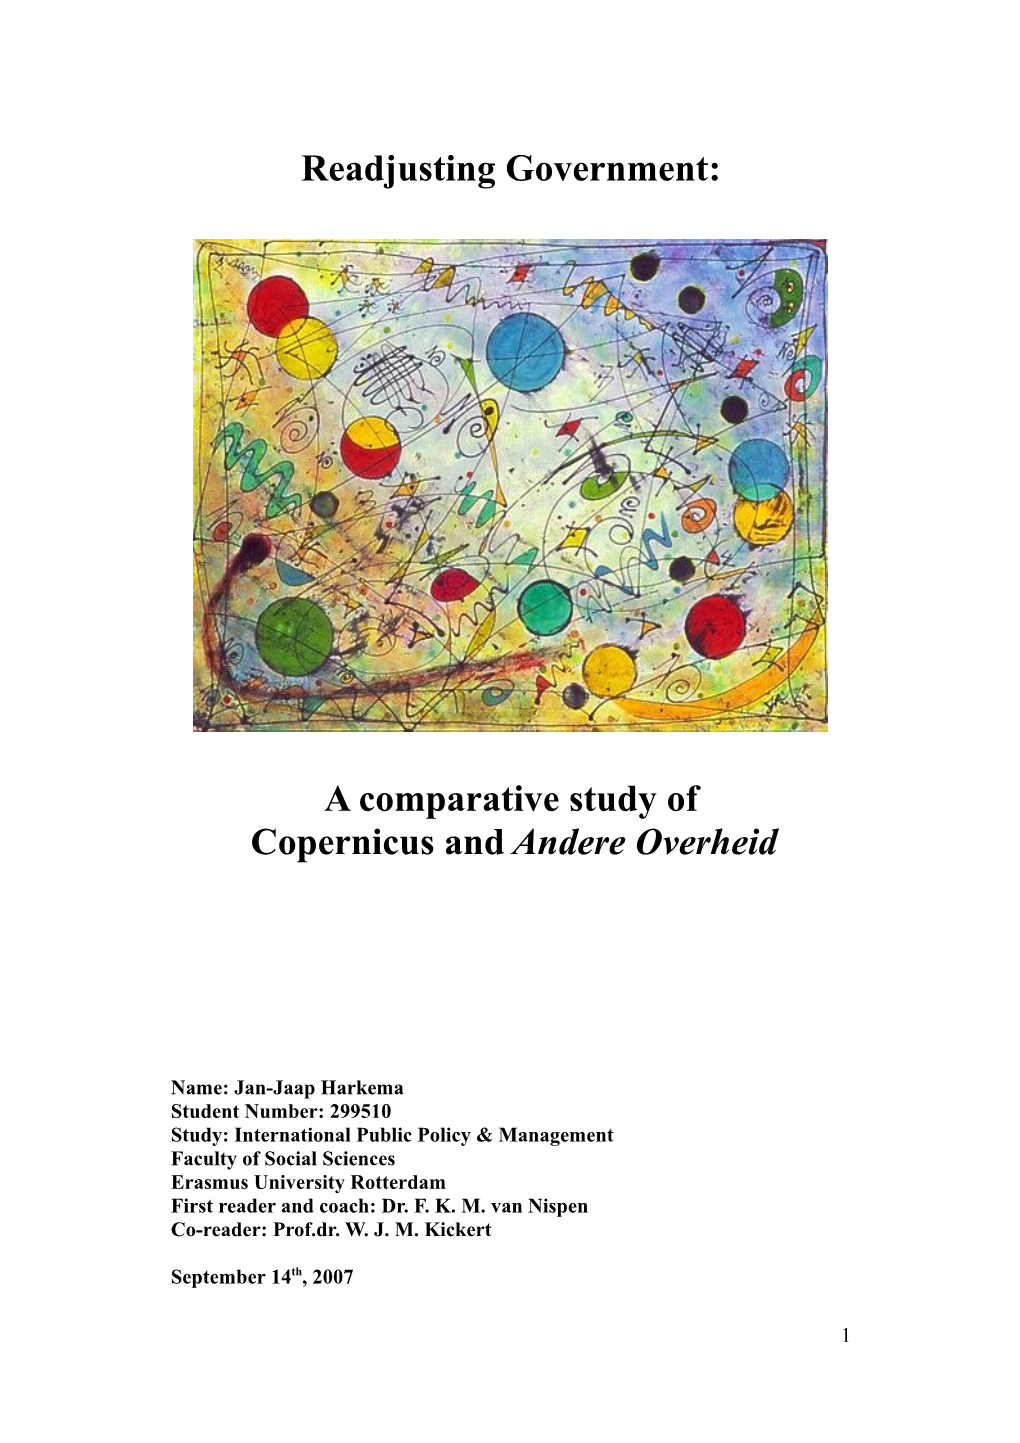 Readjusting Government: a Comparative Study of Copernicus